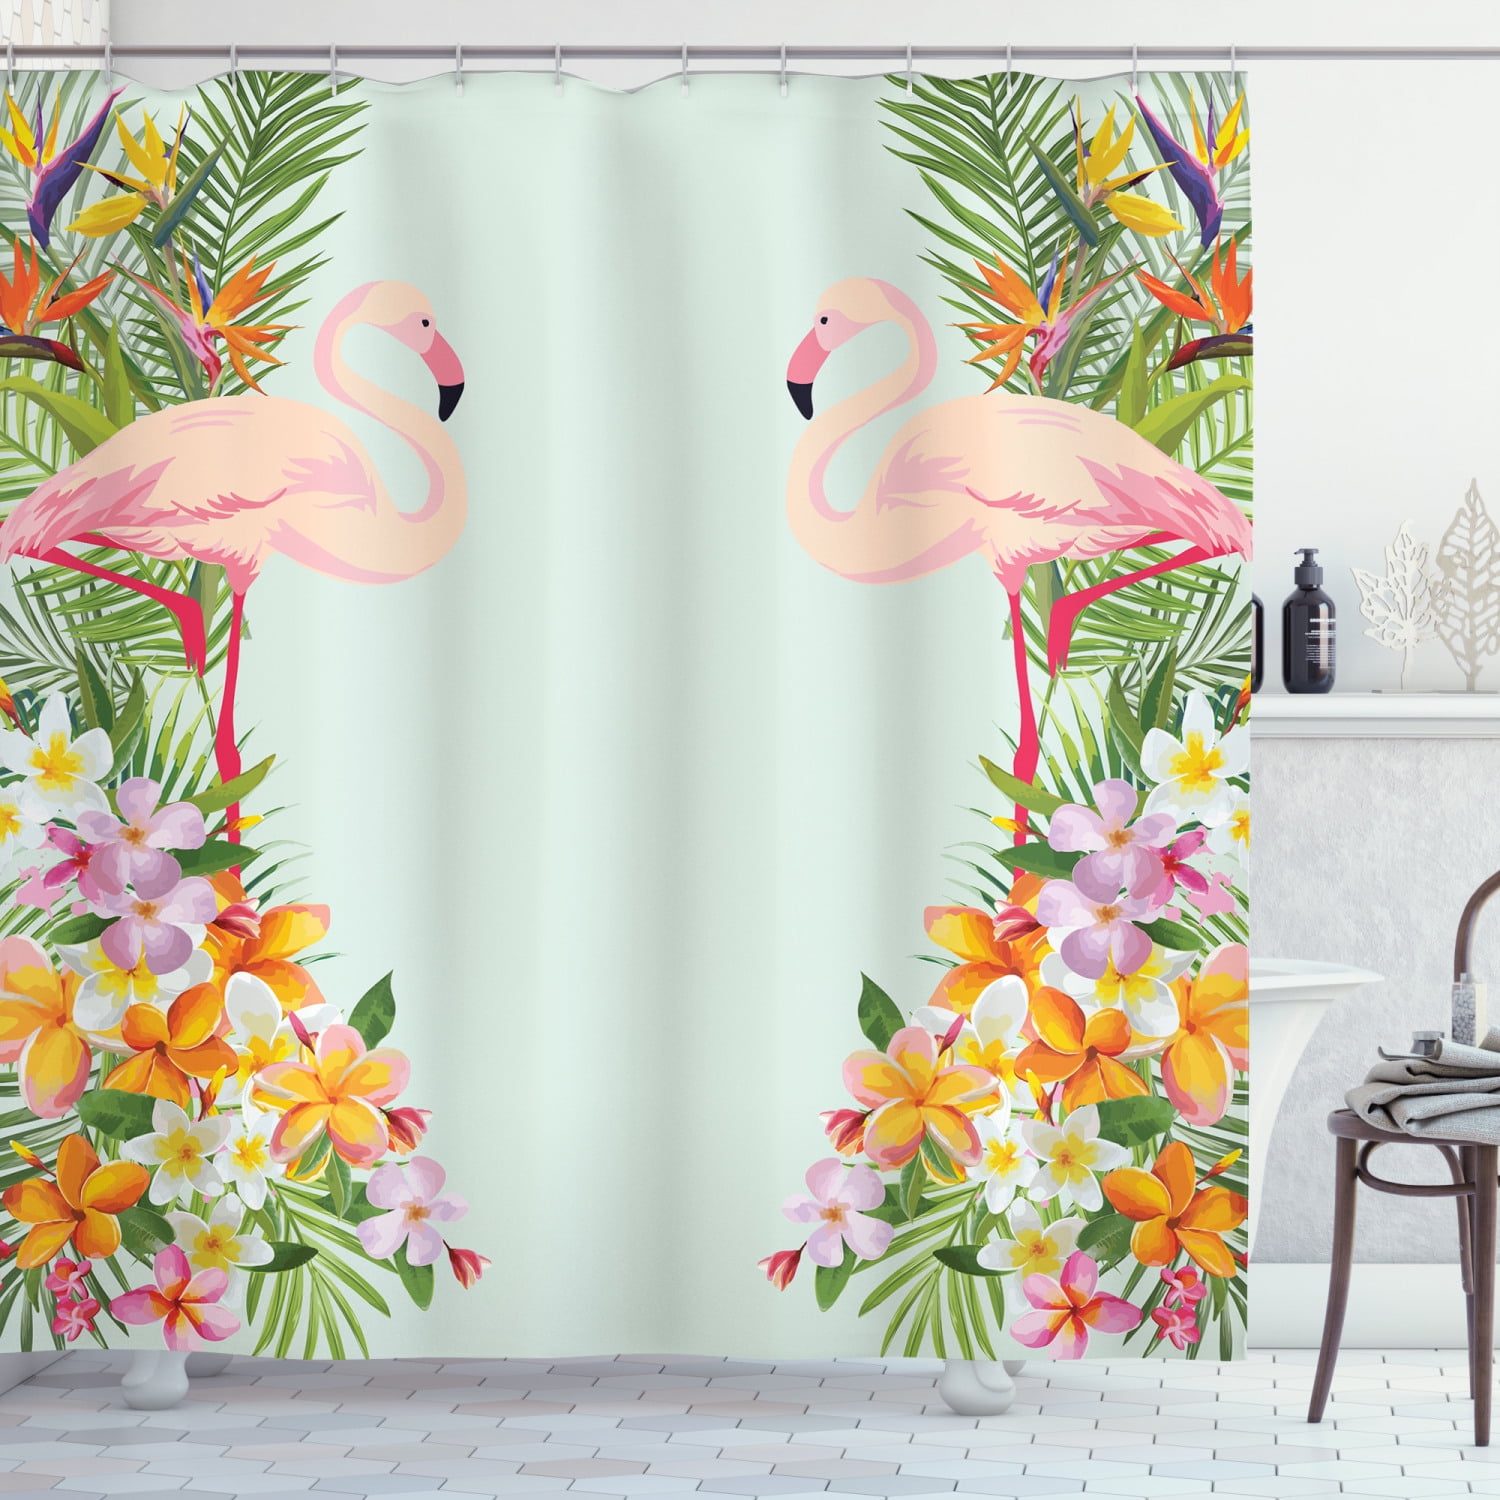 Celebrate Summer Tropical Fabric Shower Curtain Pink Flamingo & Palm Leaves NEW 